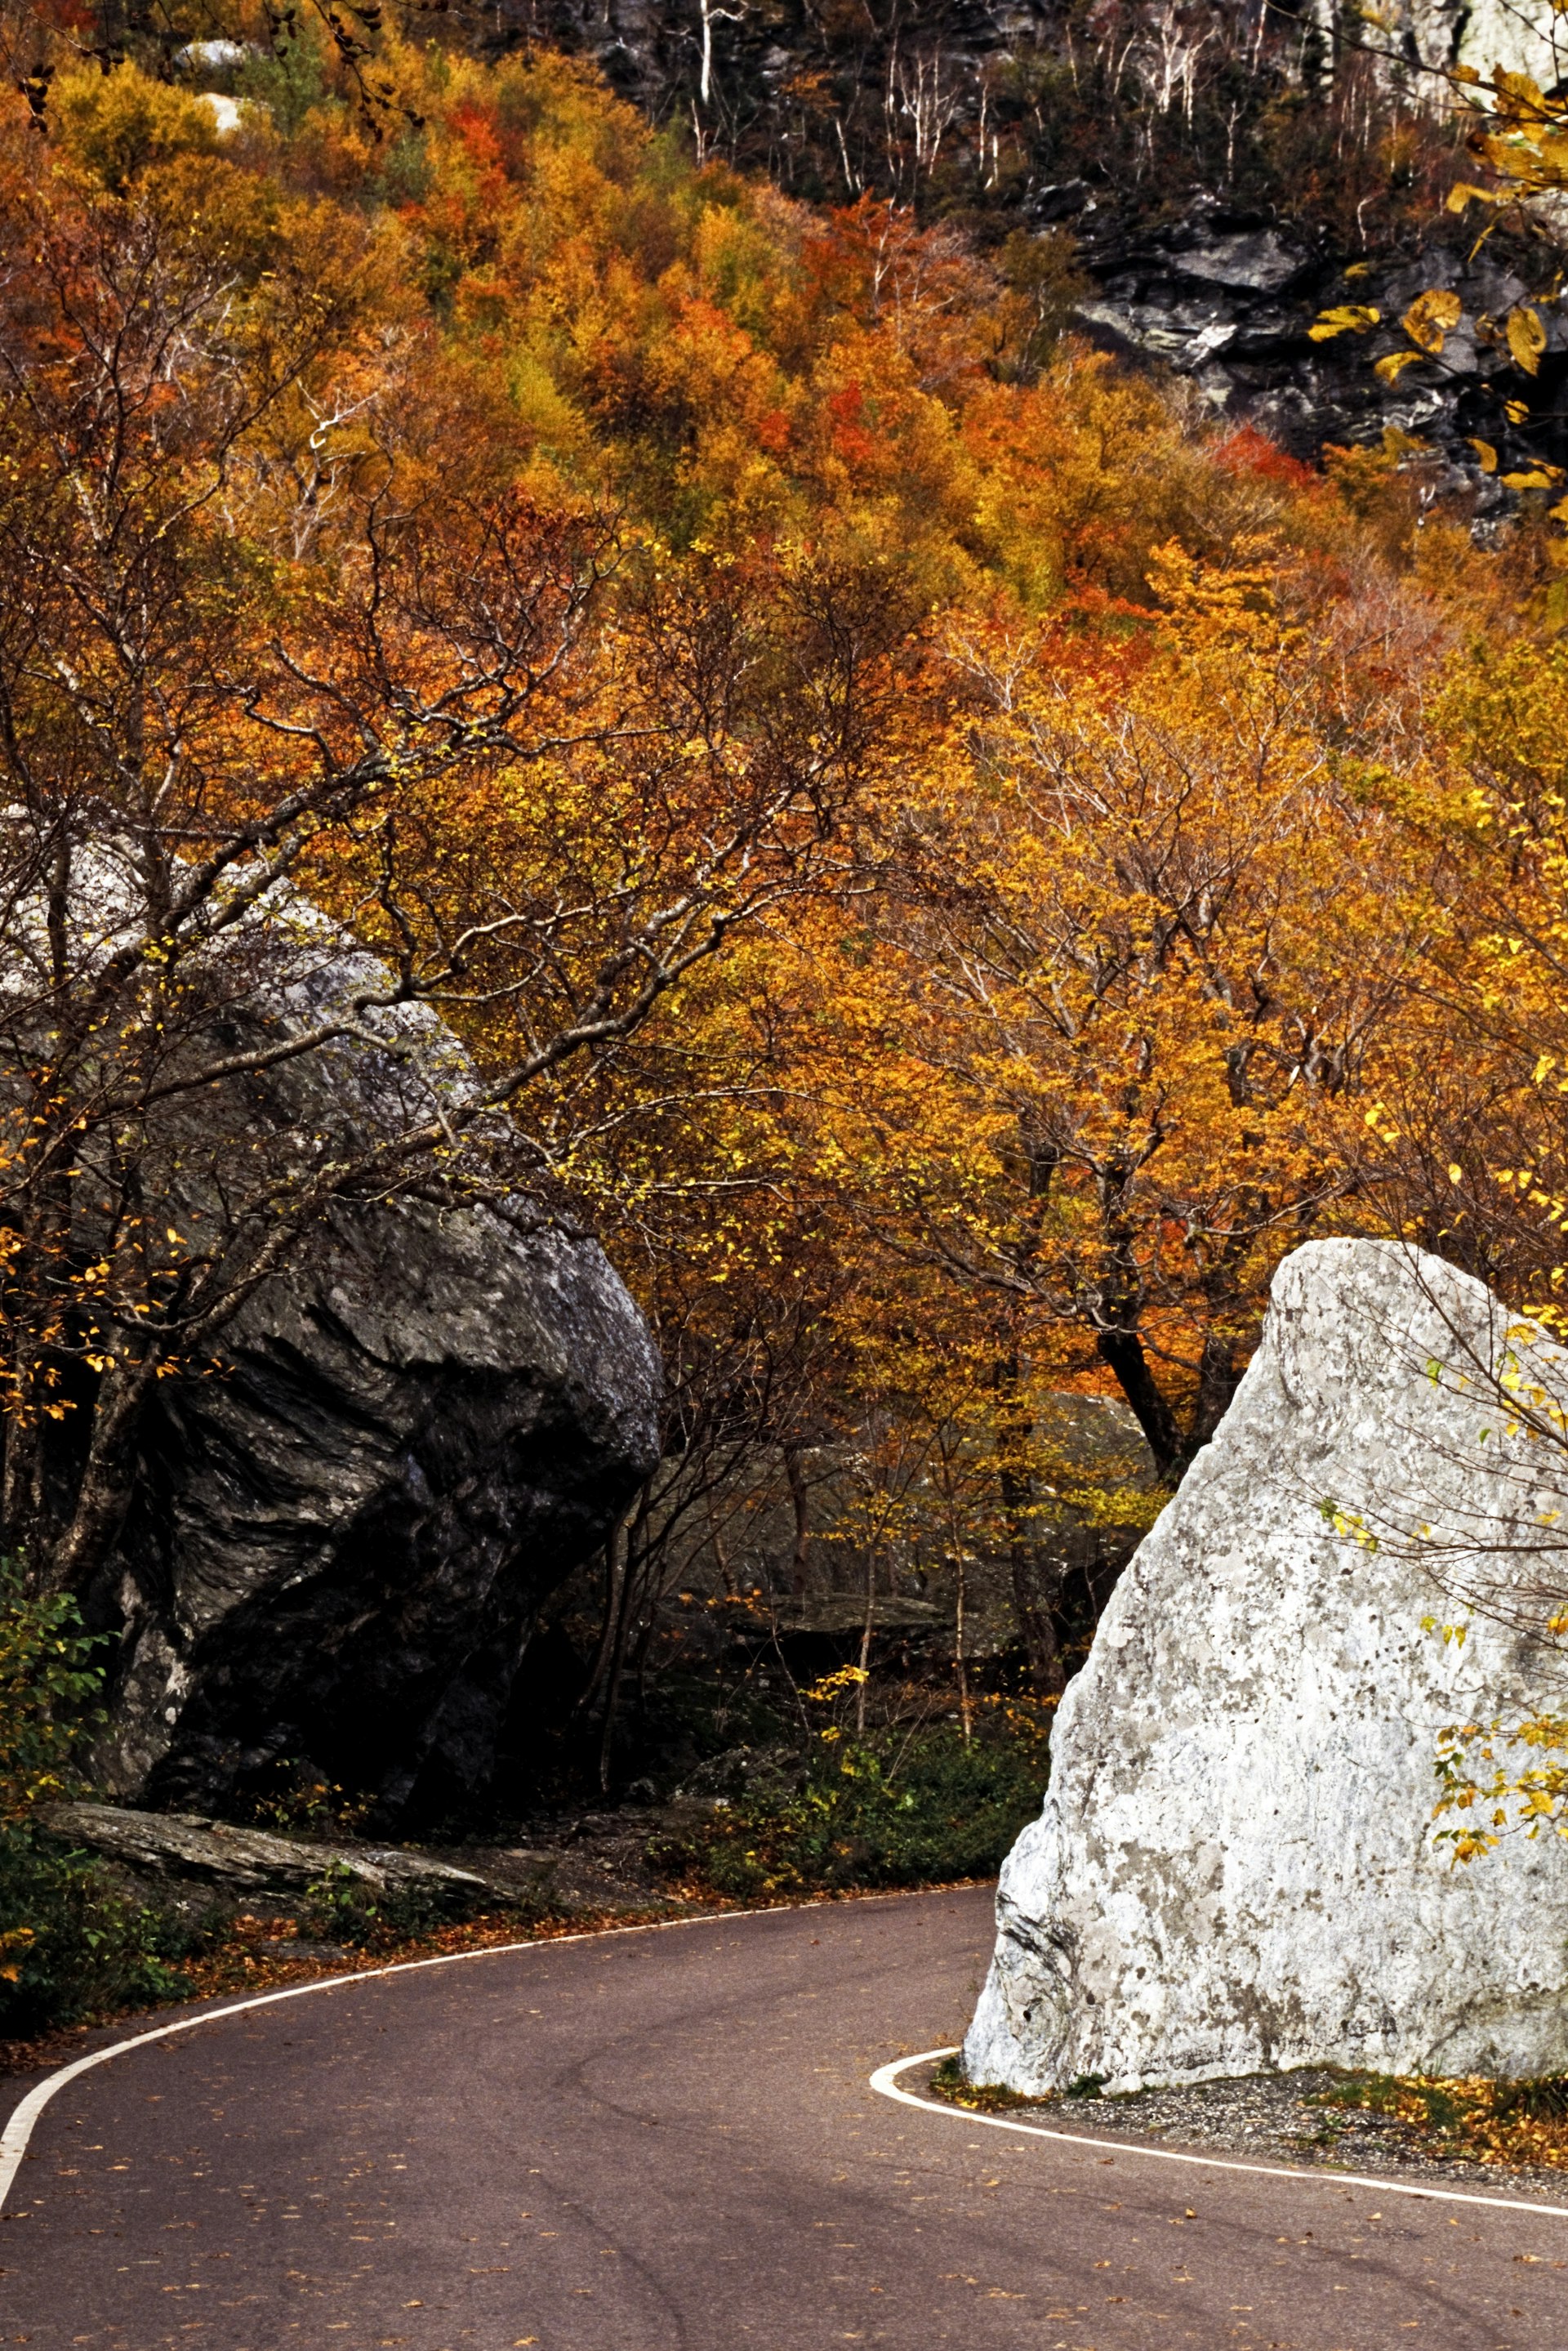 A pair of large boulders flank a single-lane road on the scenic highway called Smugglers' Notch in Vermont 